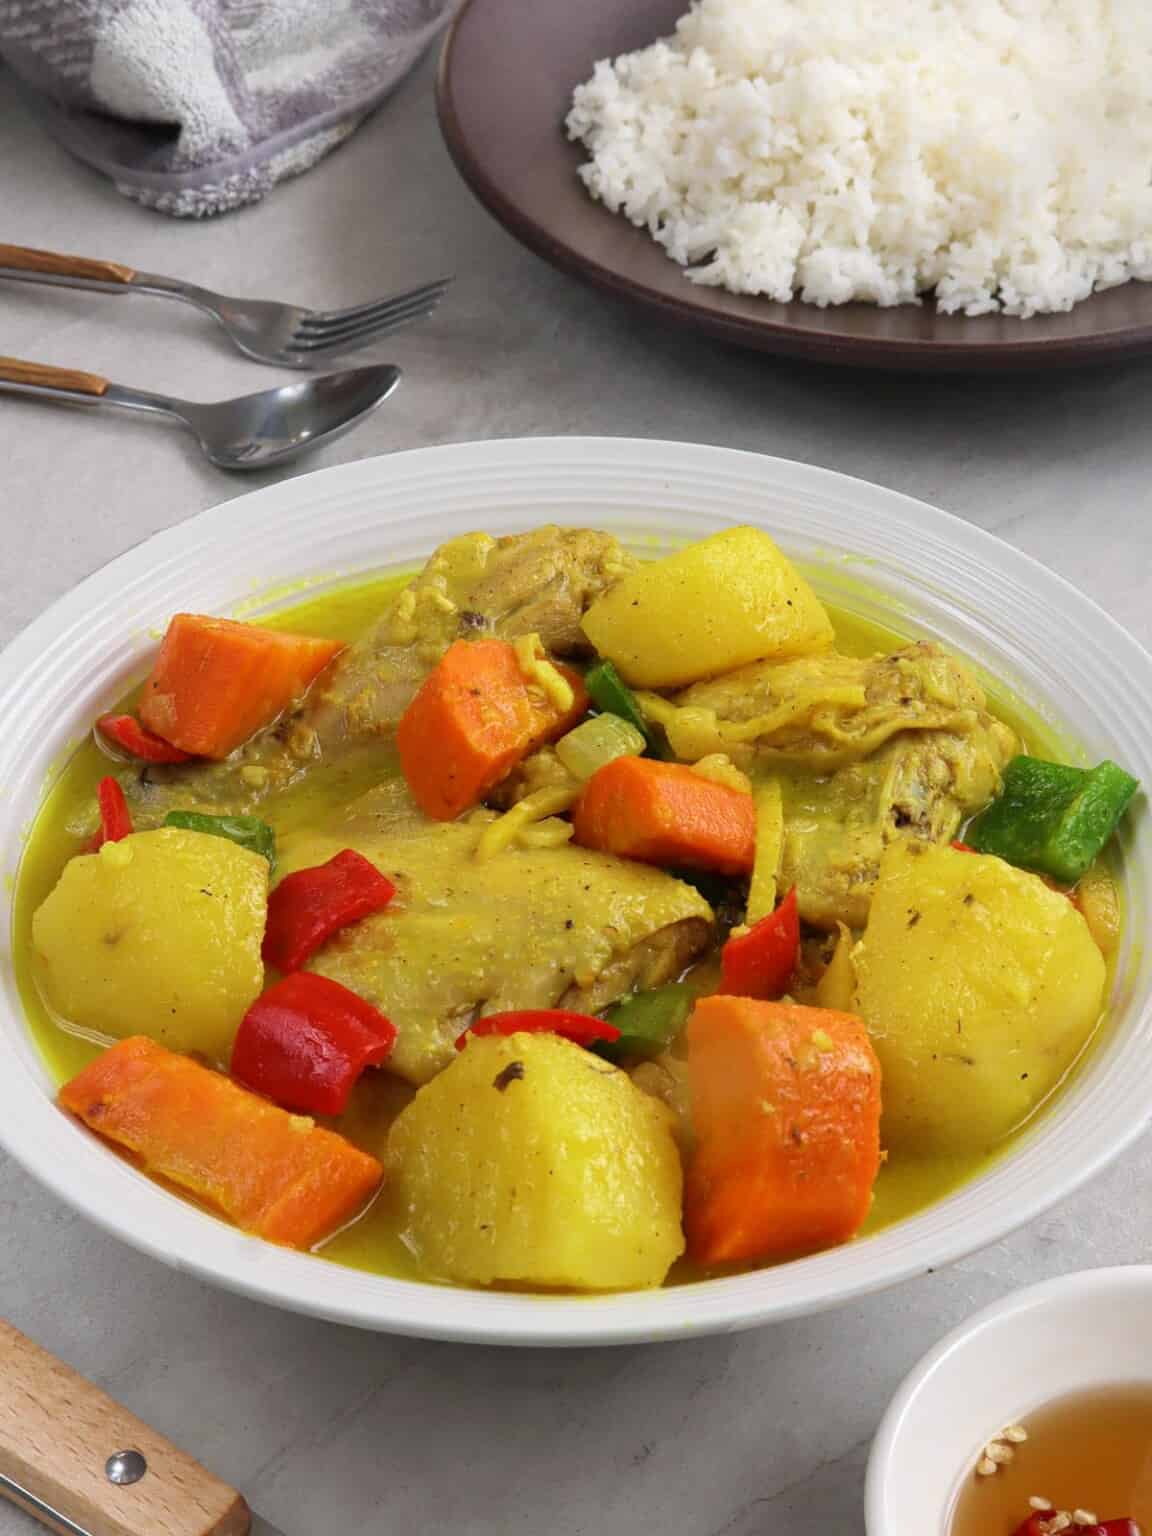 Filipino-style Chicken Curry with Coconut Milk - Kawaling Pinoy